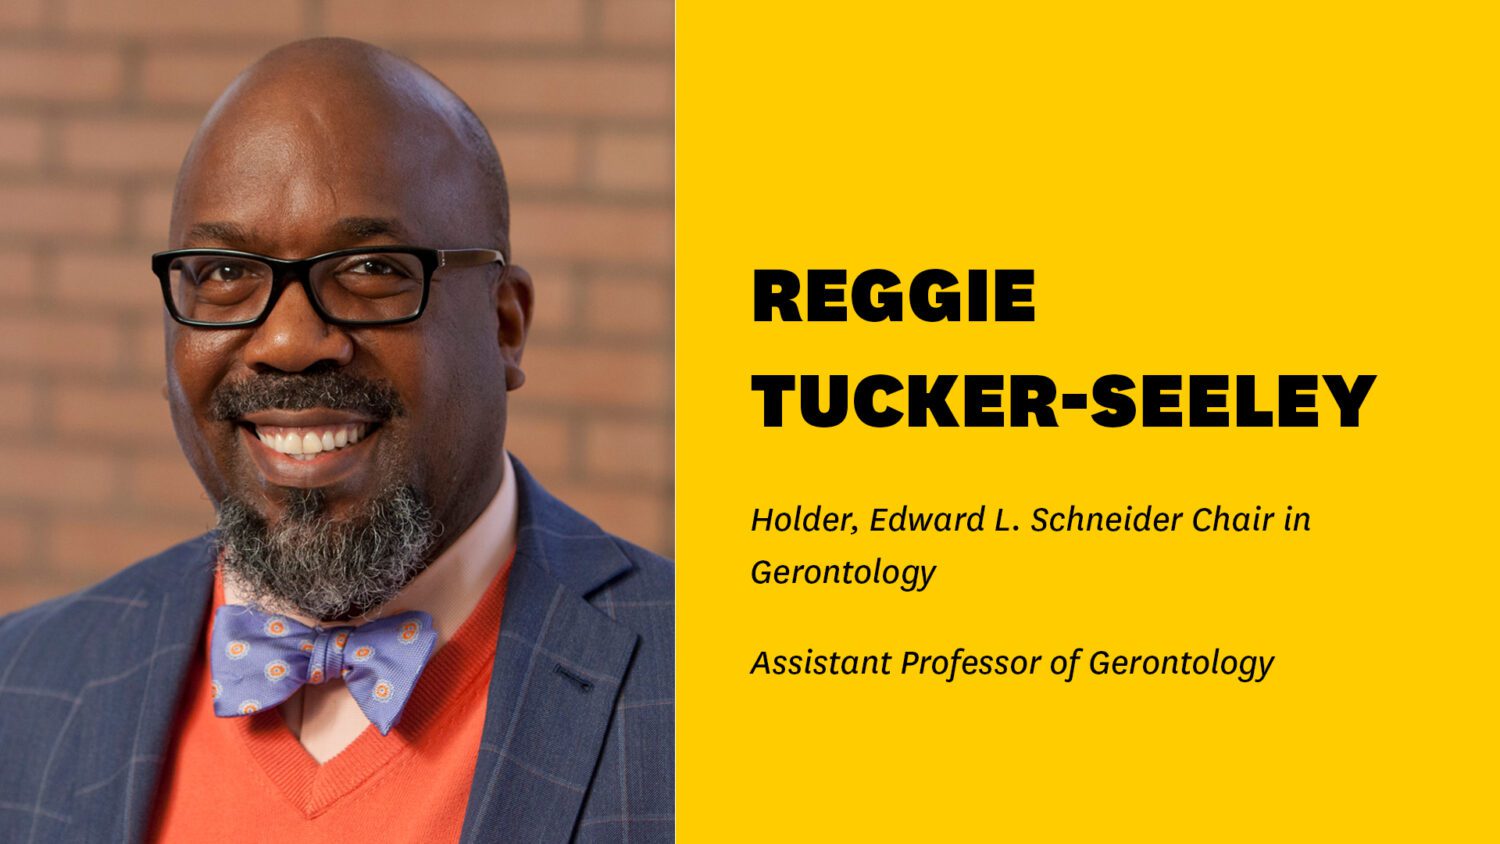 Reginald Tucker-Seeley Lessons in Lifespan Health Podcast